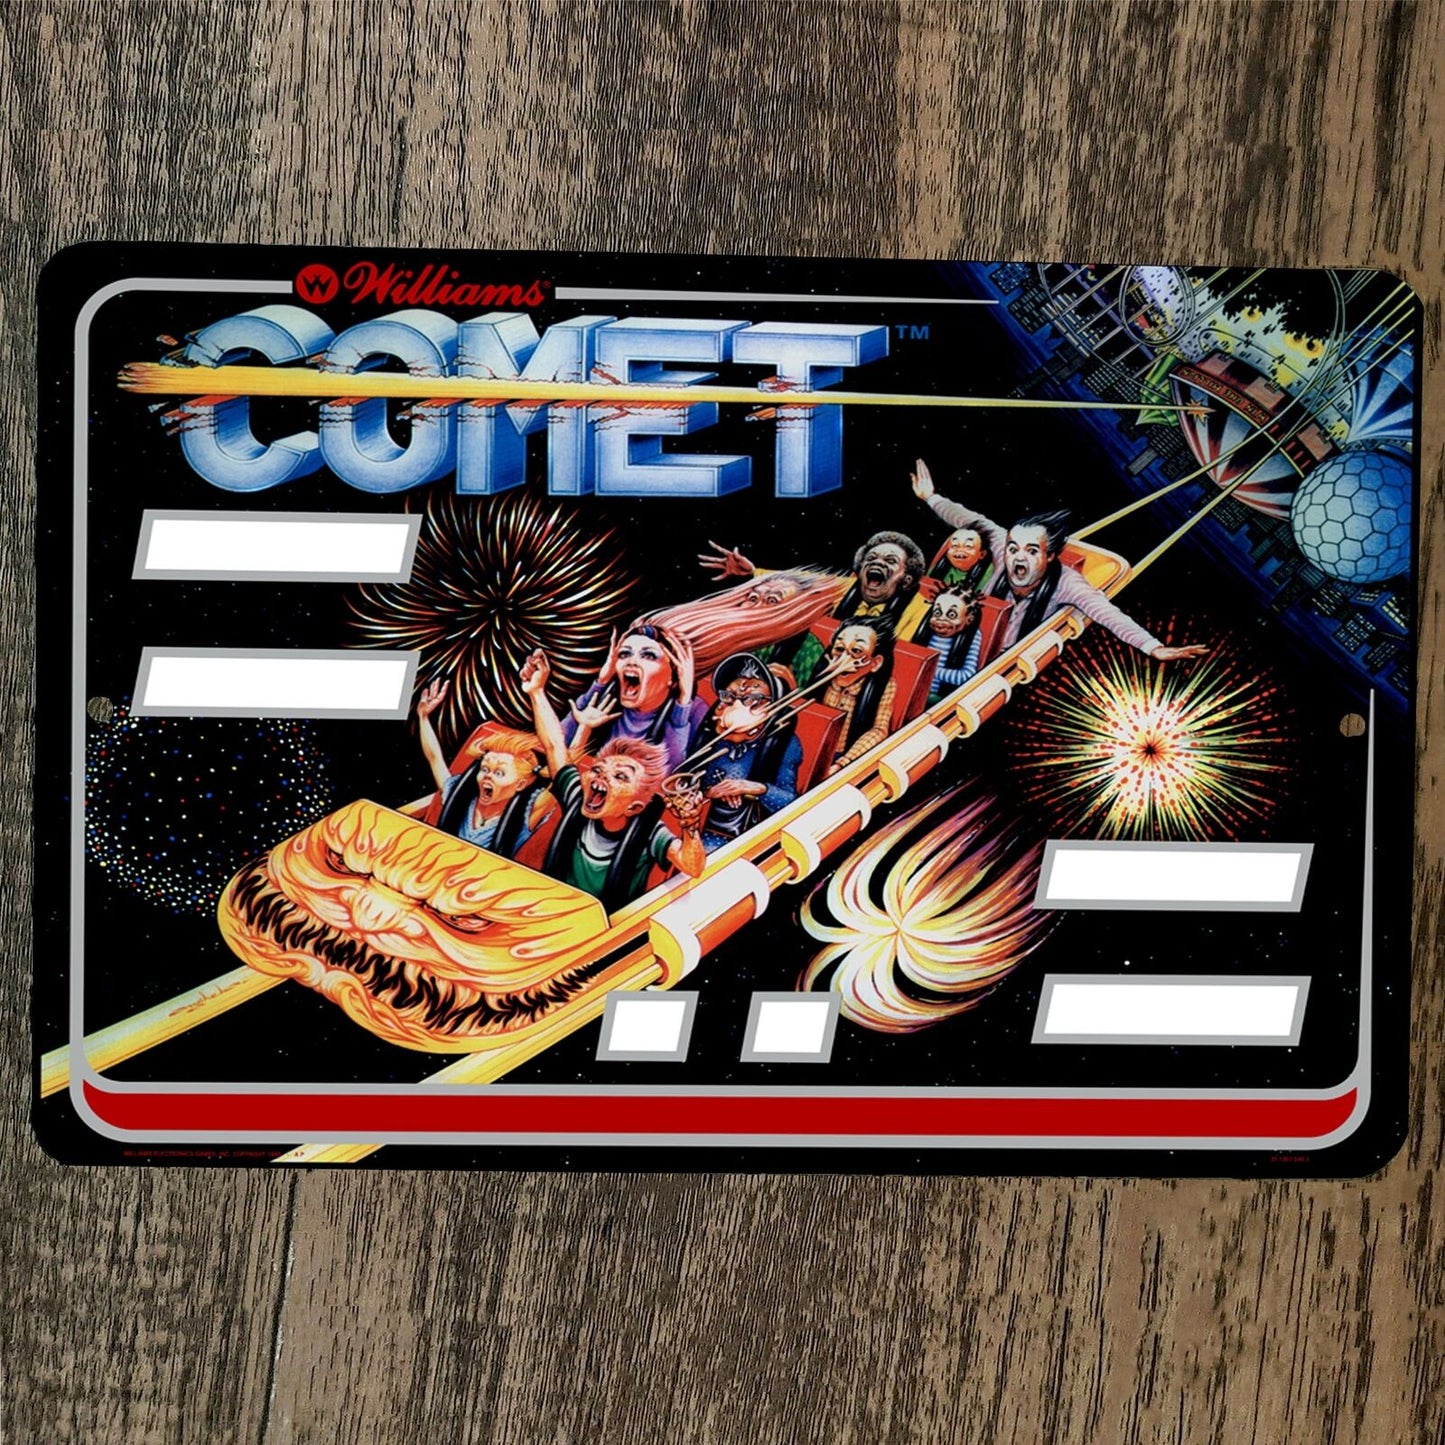 Comet Arcade 8x12 Metal Wall Video Game Sign